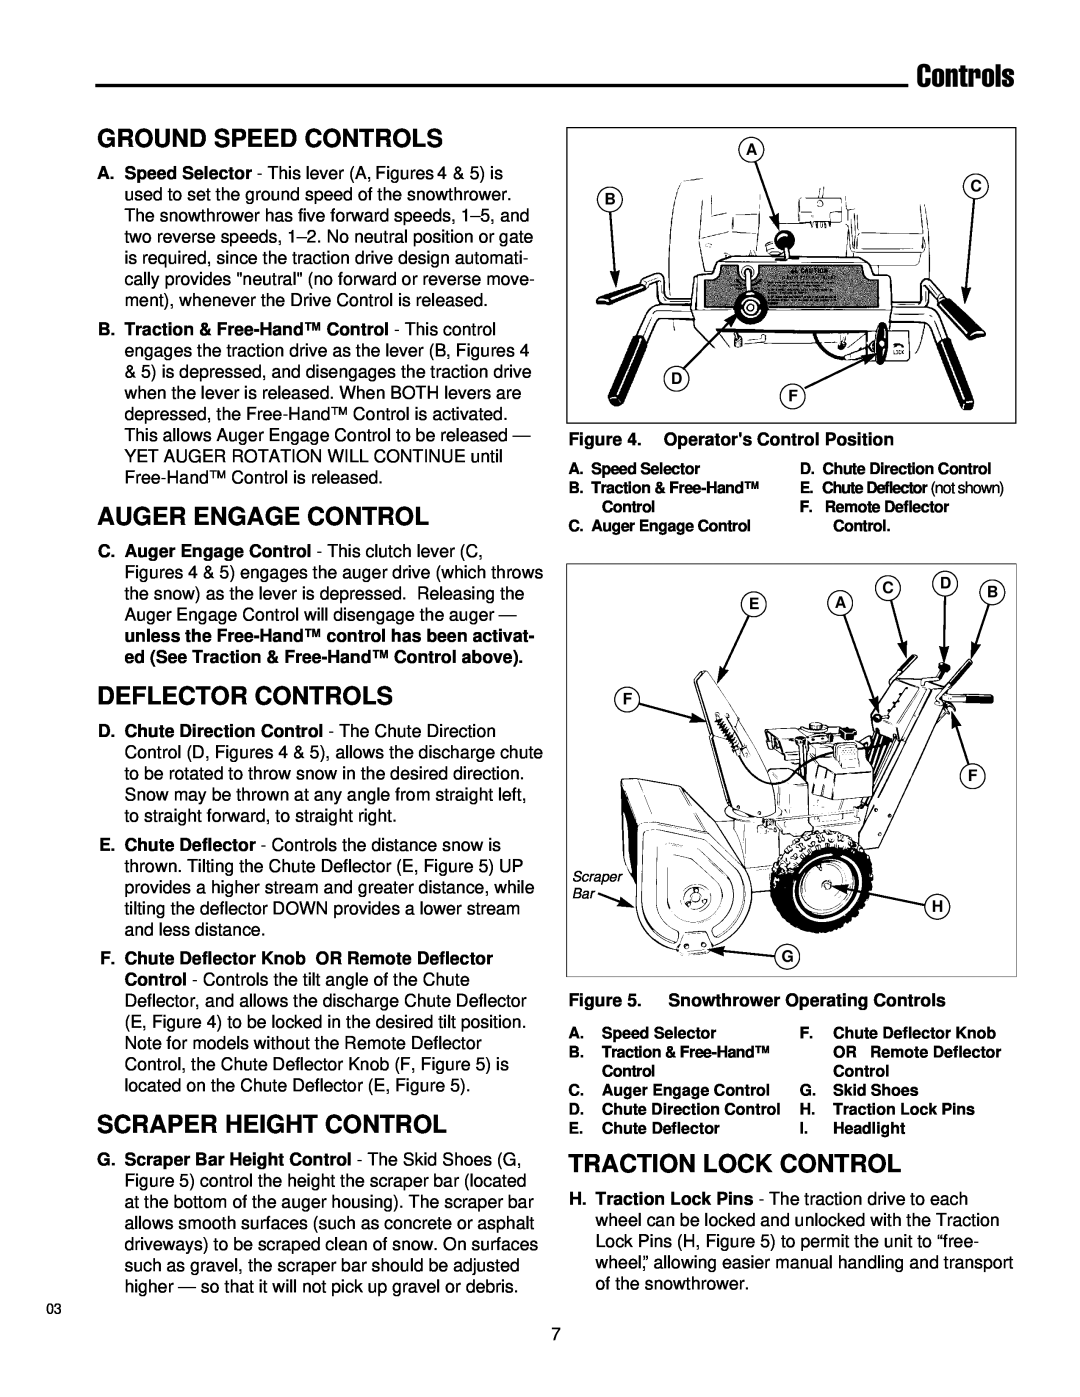 Simplicity 1692570, 1692469 manual Ground Speed Controls, Auger Engage Control, Deflector Controls, Scraper Height Control 